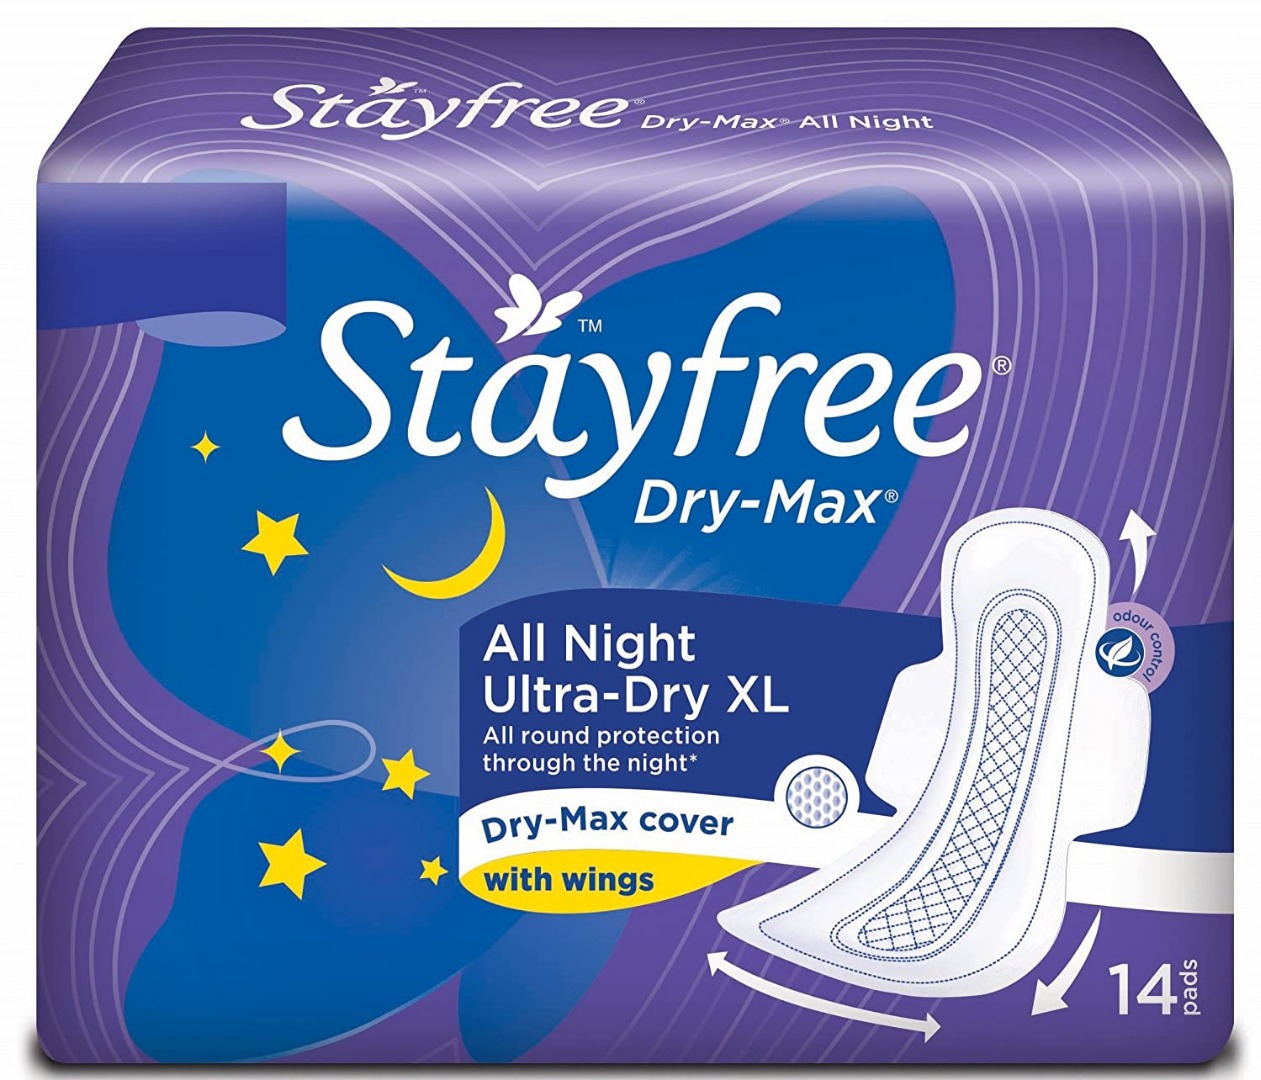 Stayfree Dry Max All Night Sanitary napkins (14 Count)